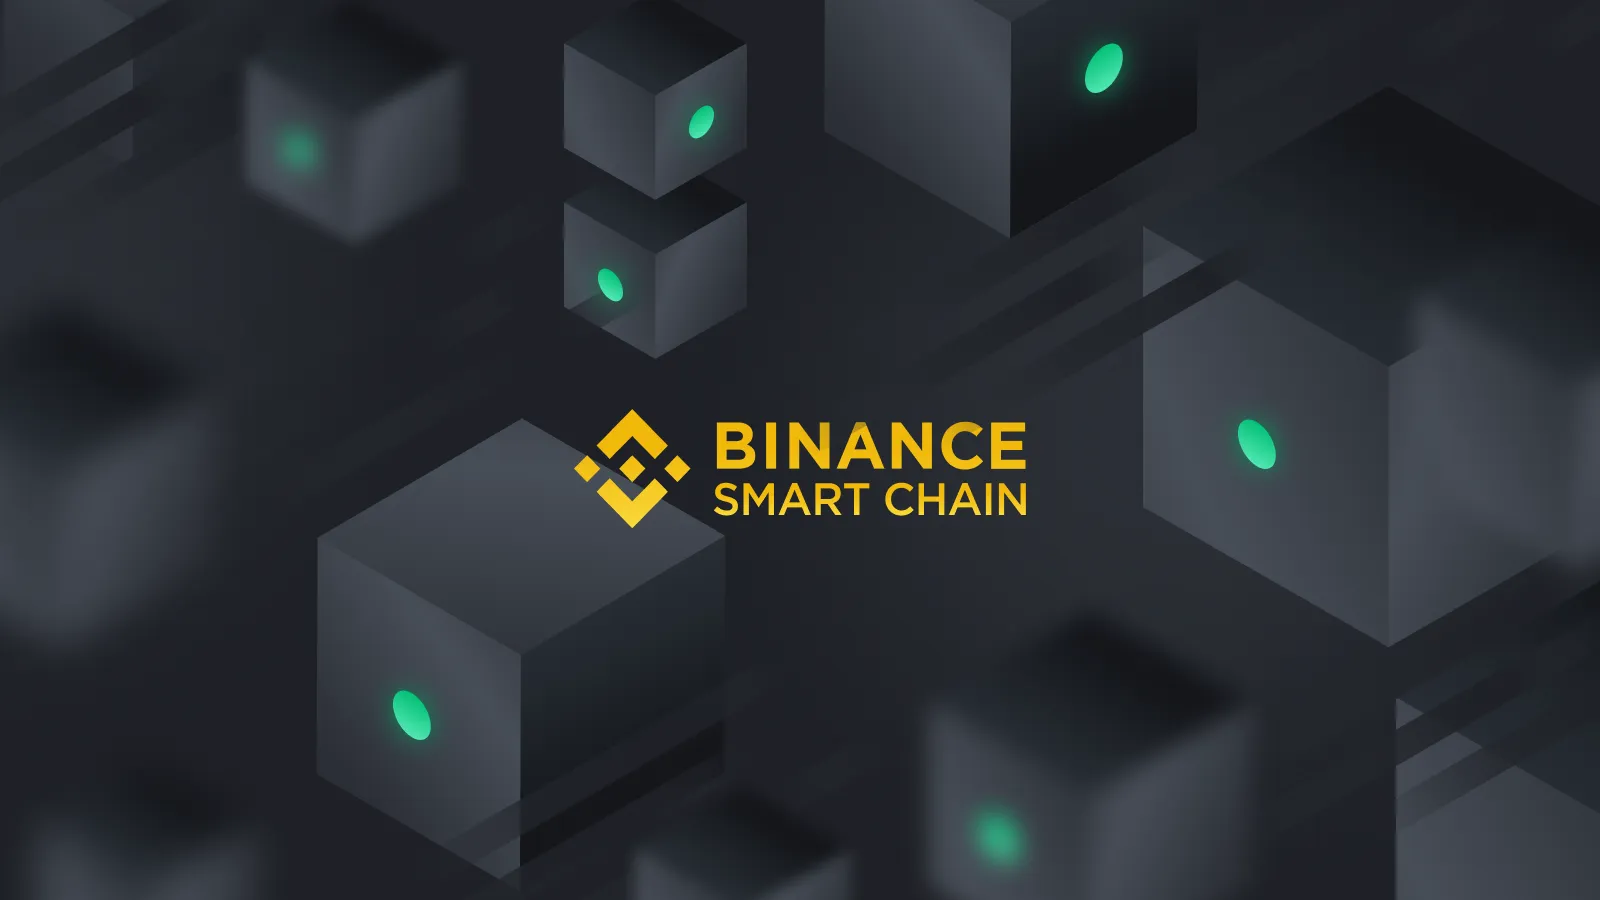 Deploying your first Smart Contract on Binance Smart Chain